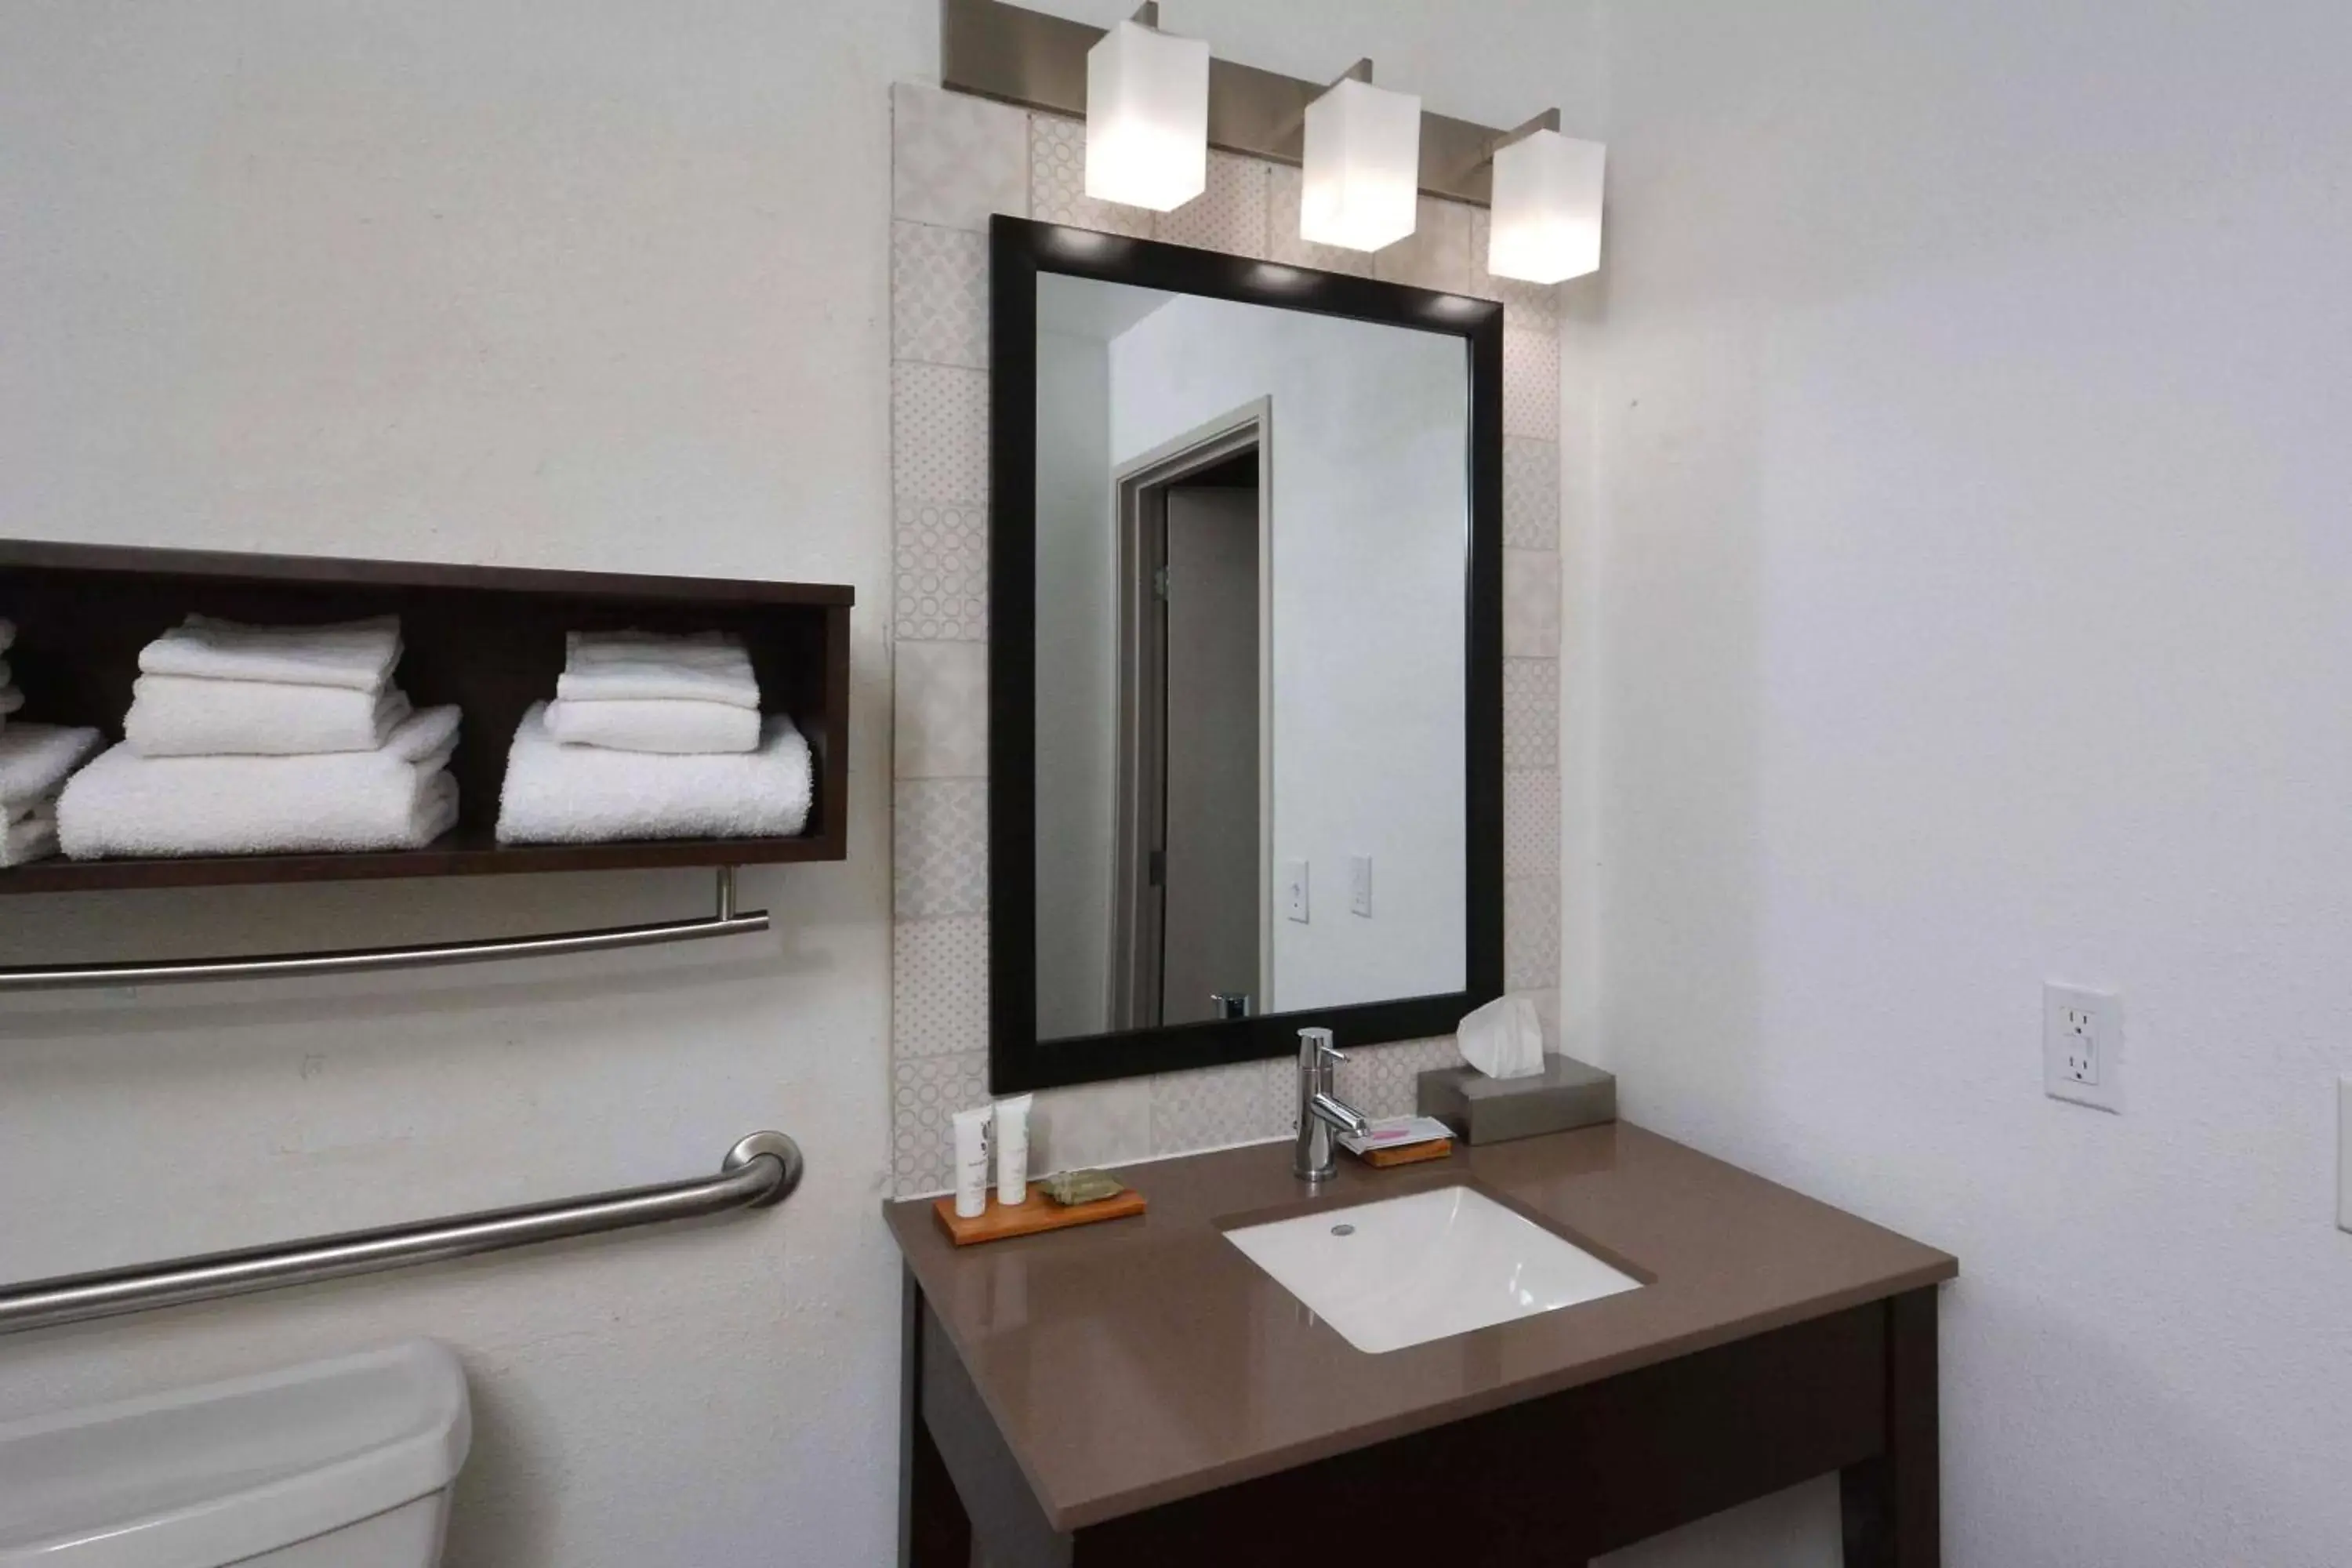 Bathroom in Country Inn & Suites by Radisson Asheville West